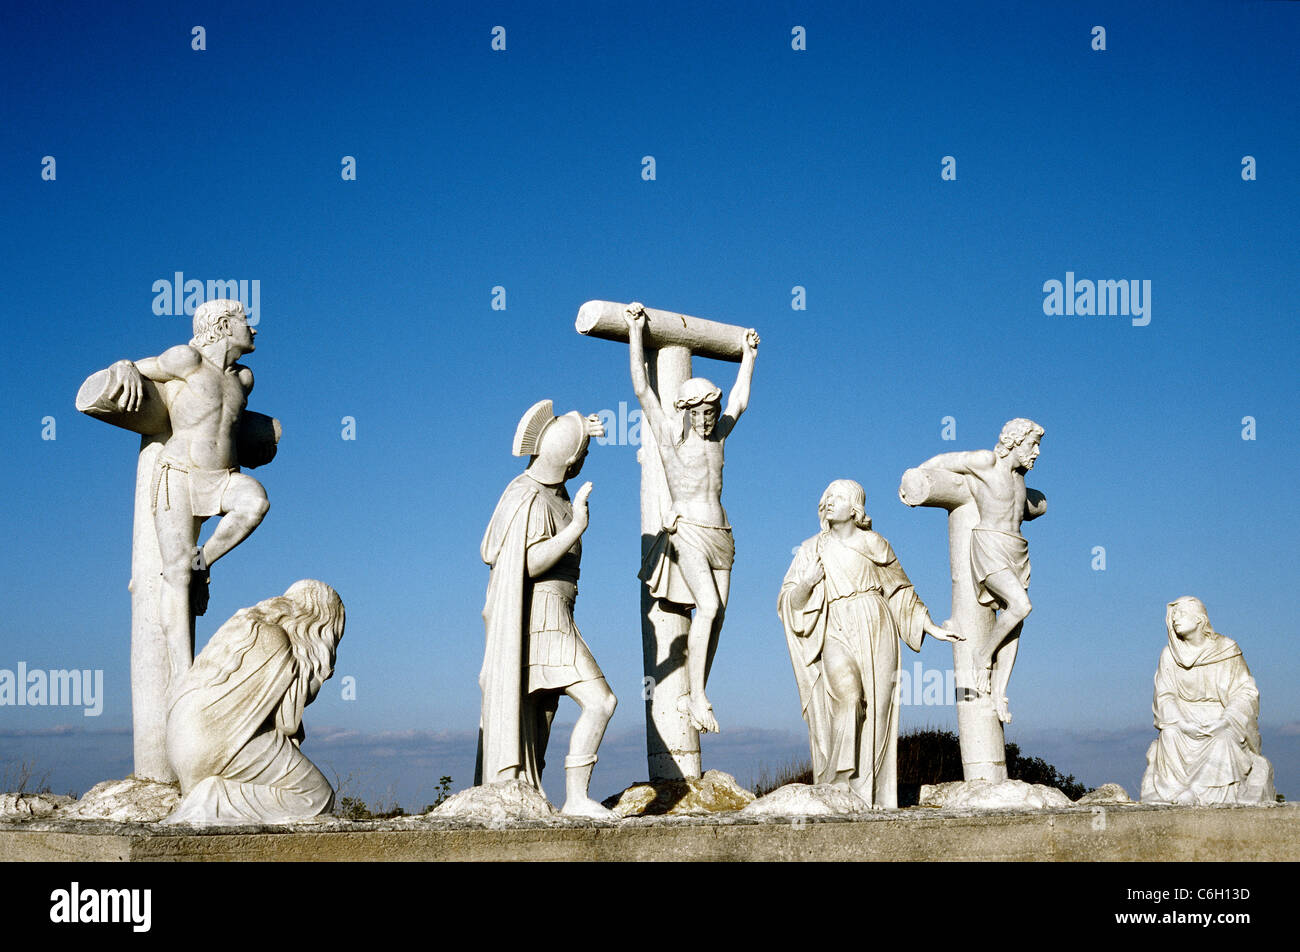 Jesus dies on the Cross. Marble sculptures depicting the final hours of Jesus at the Way of the Cross on Gozo island in Malta. Stock Photo